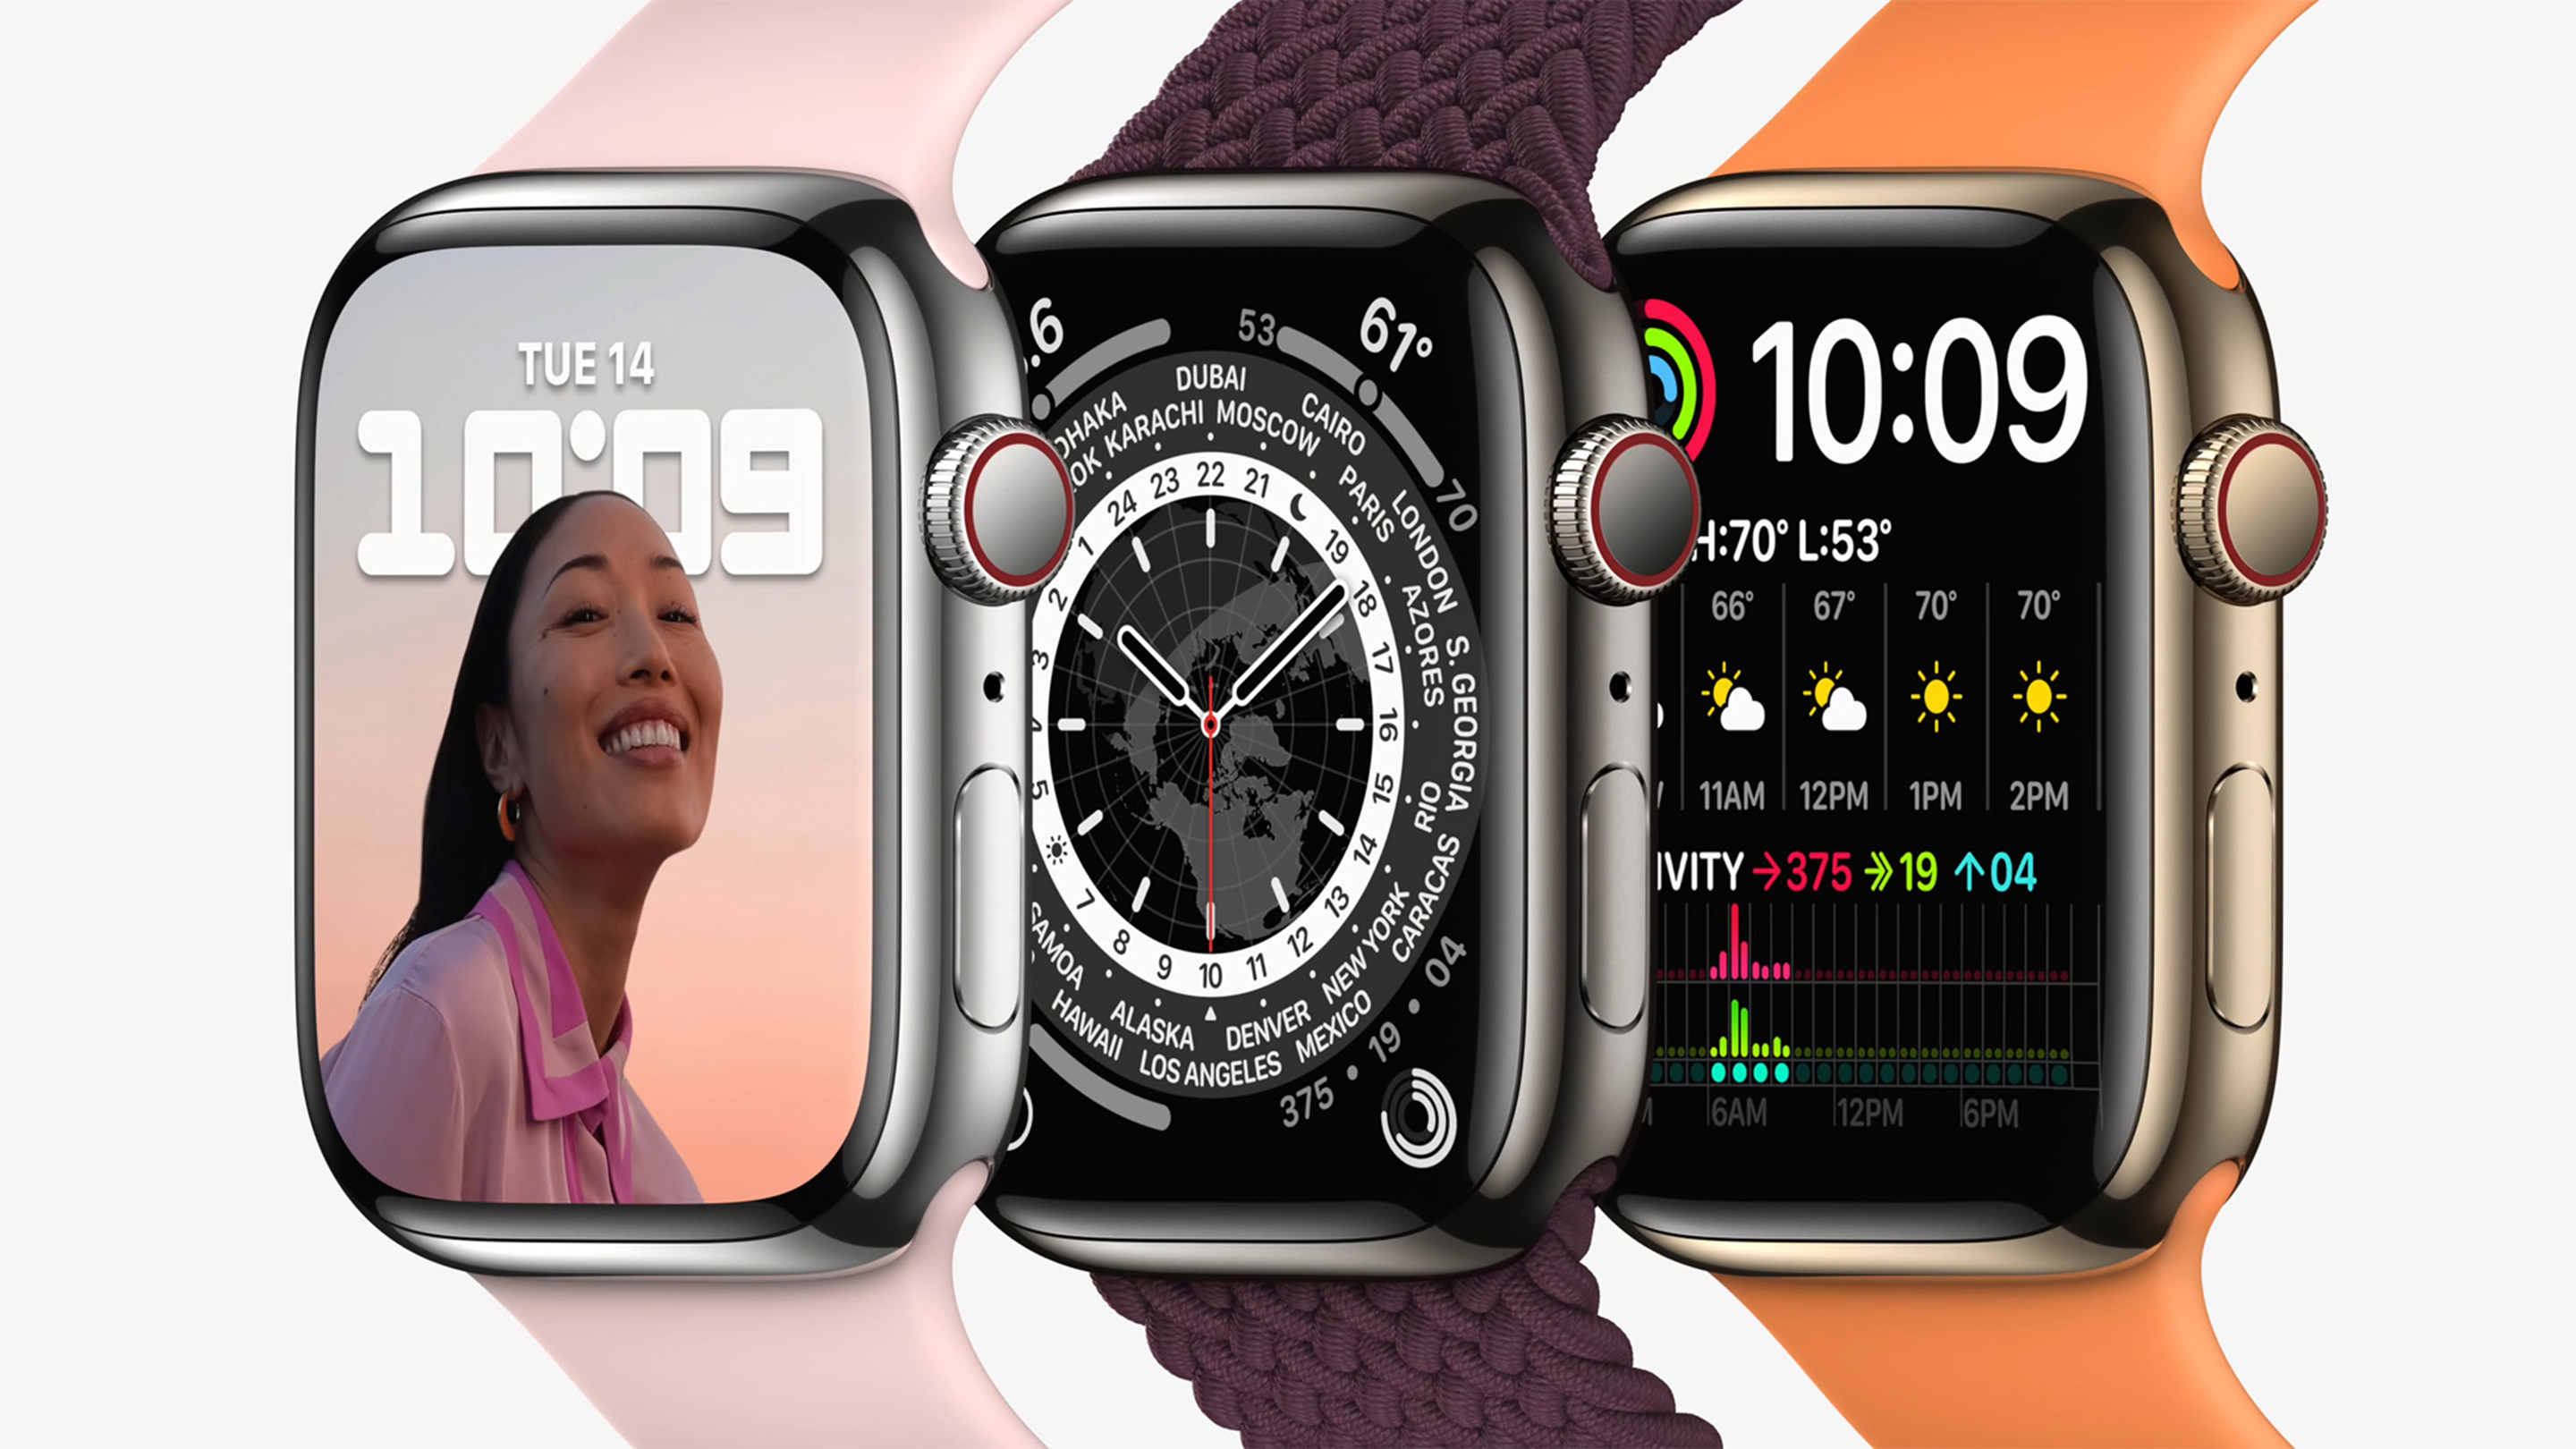 Apple announces the launch of Apple Watch Series 7, running WatchOS 8